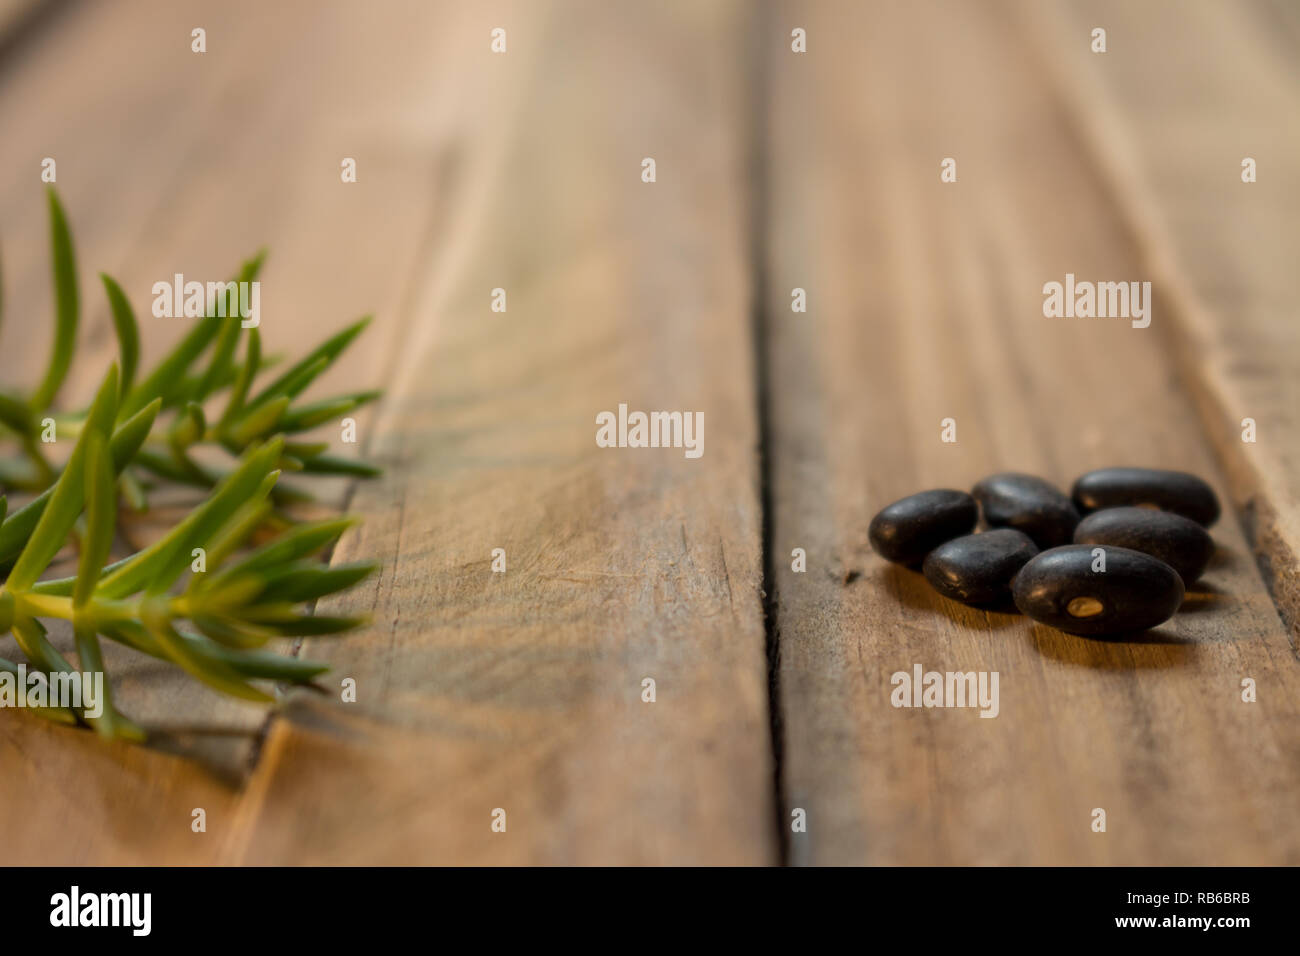 Some green branches and some seeds on a wooden rustic board. Plant foods on neutral backgrounds. Stock Photo